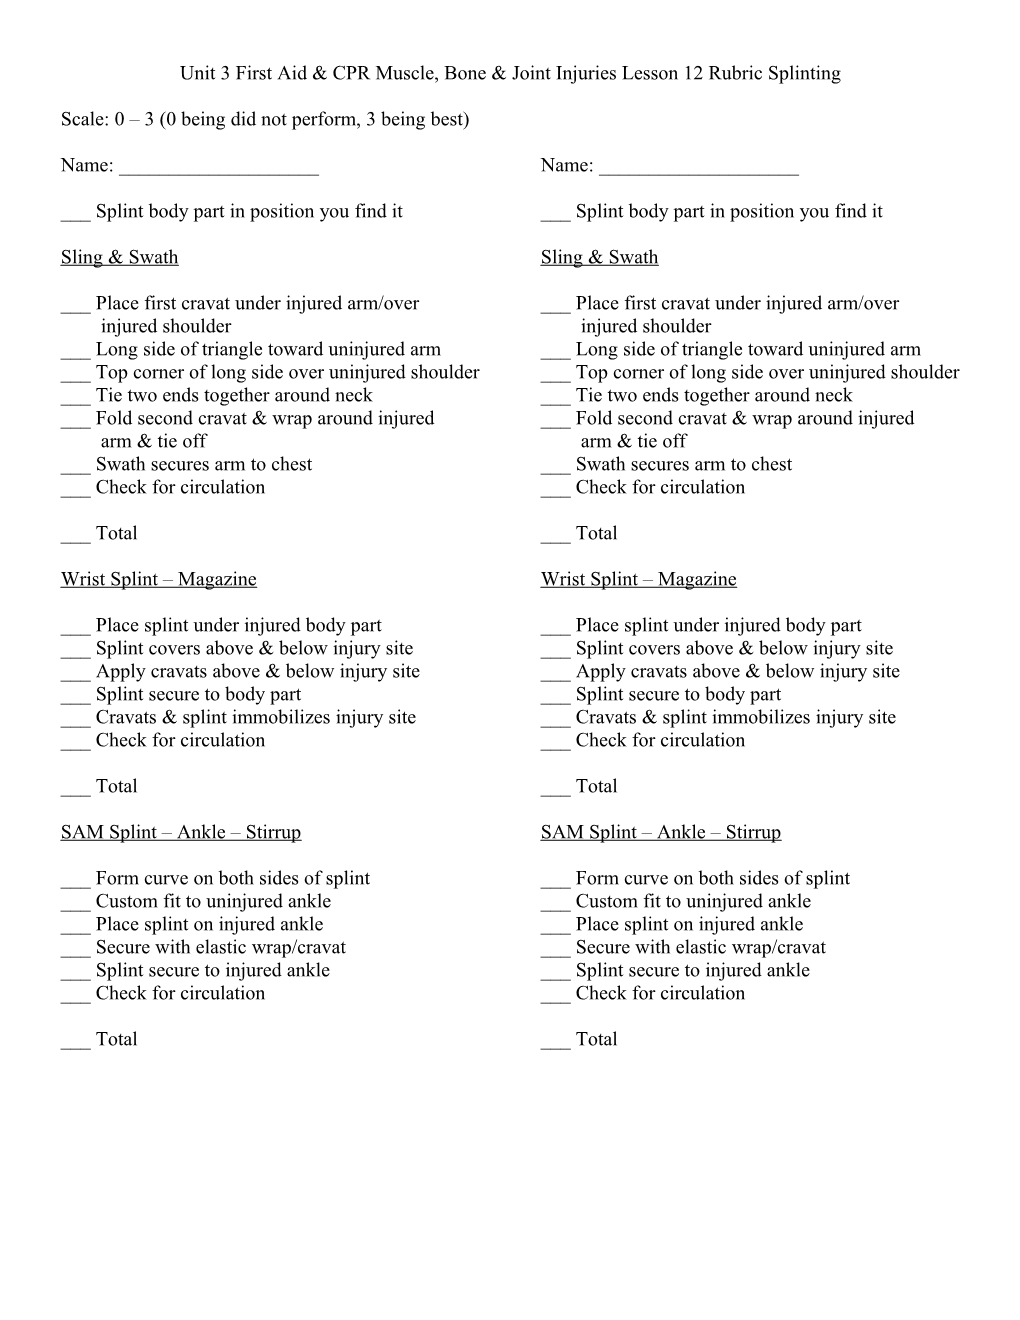 Unit 3 First Aid & CPR Muscle, Bone & Joint Injuries Lesson 12 Rubric Splinting